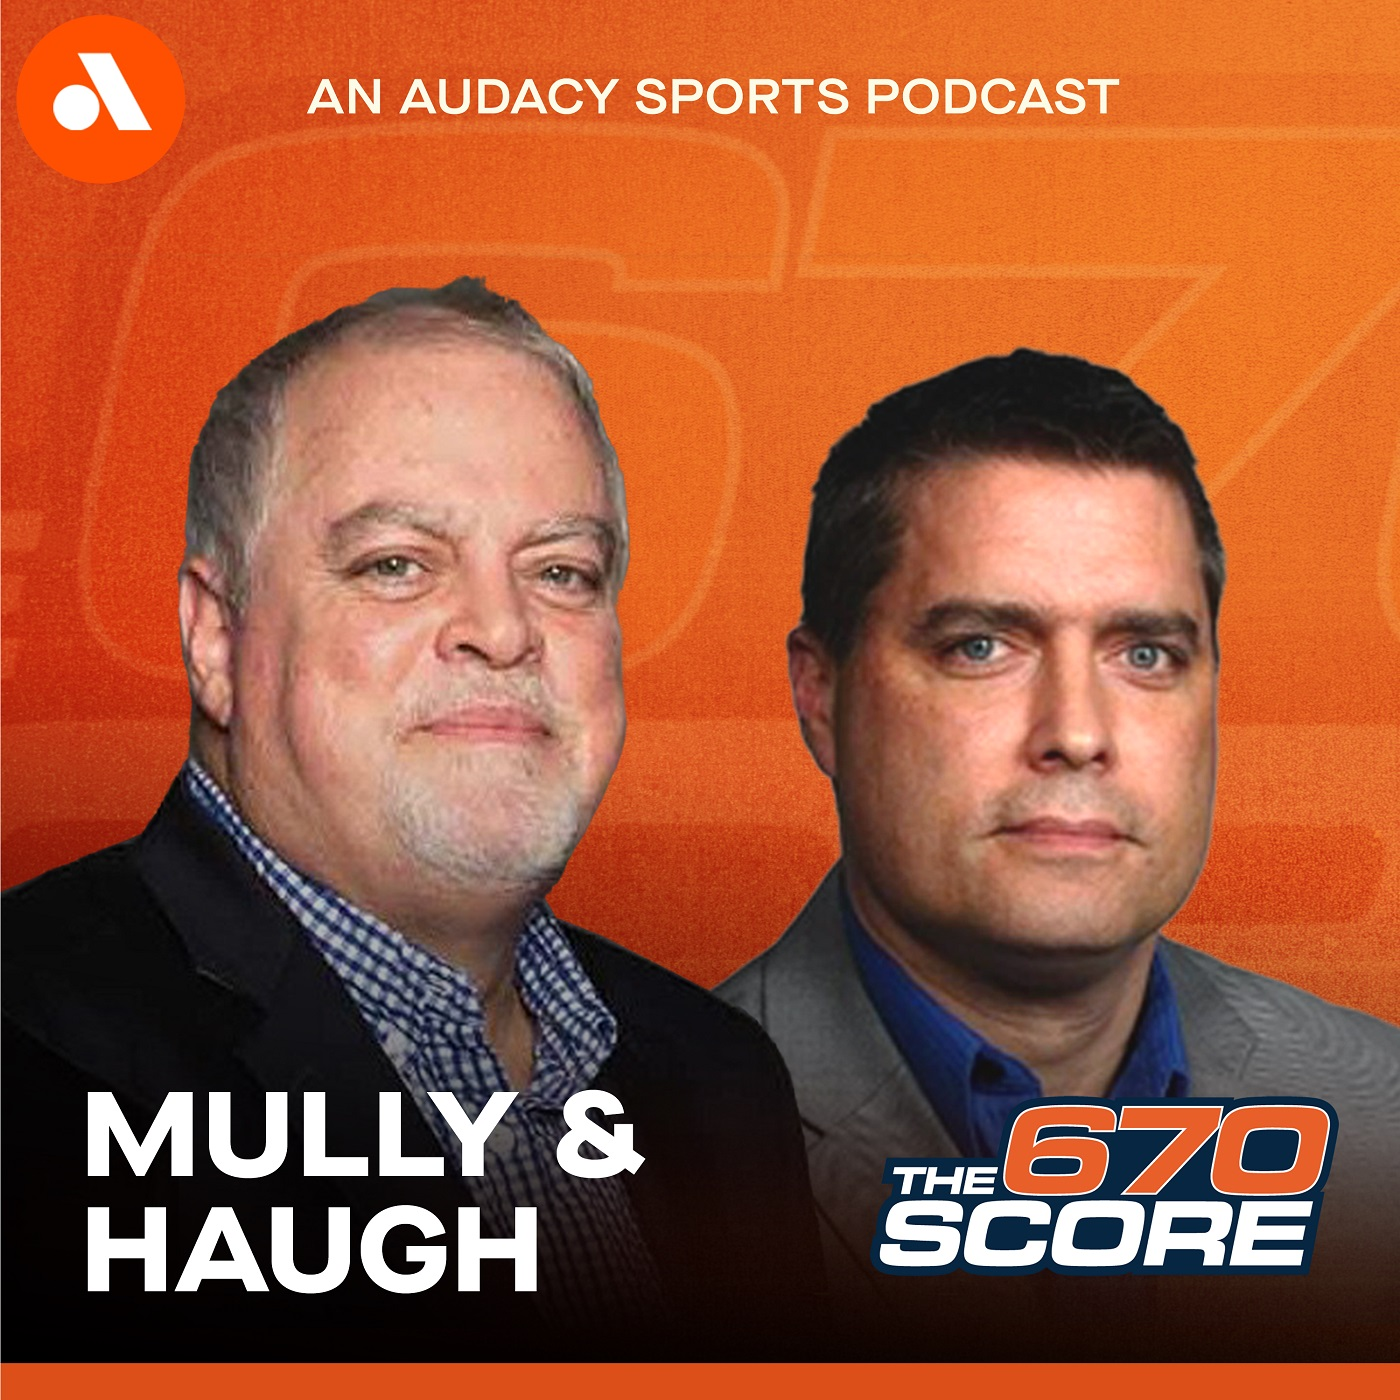 Mully & Haugh: MLB/NCAA Tournament talk, Taylor McGregor interview (Hour 3)